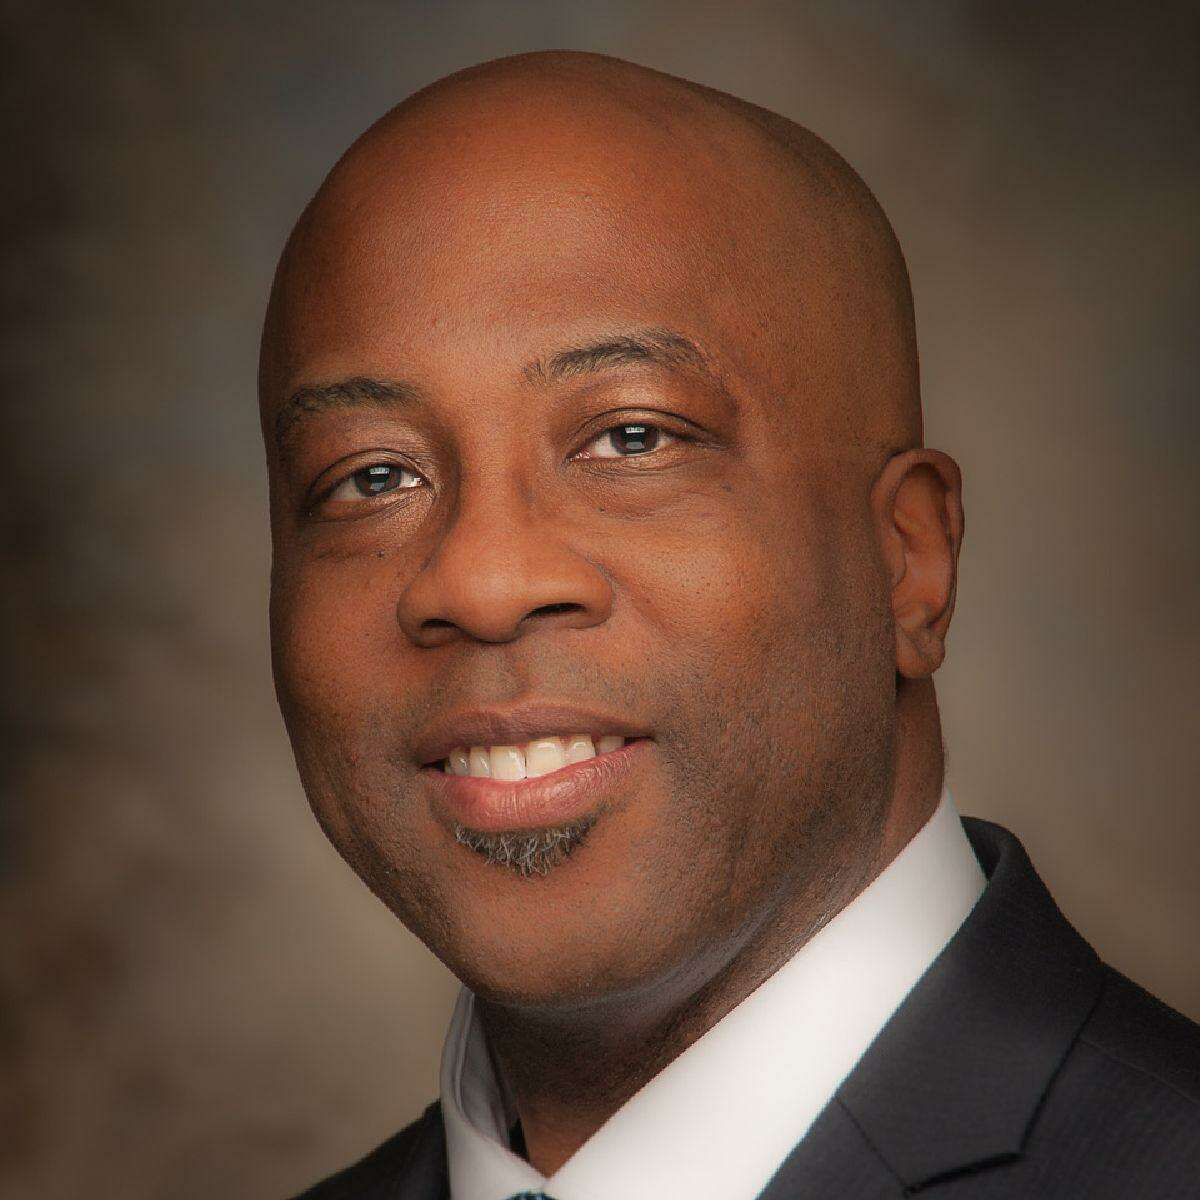 William Terry Brown, is the incoming CEO at Gateway Community College.